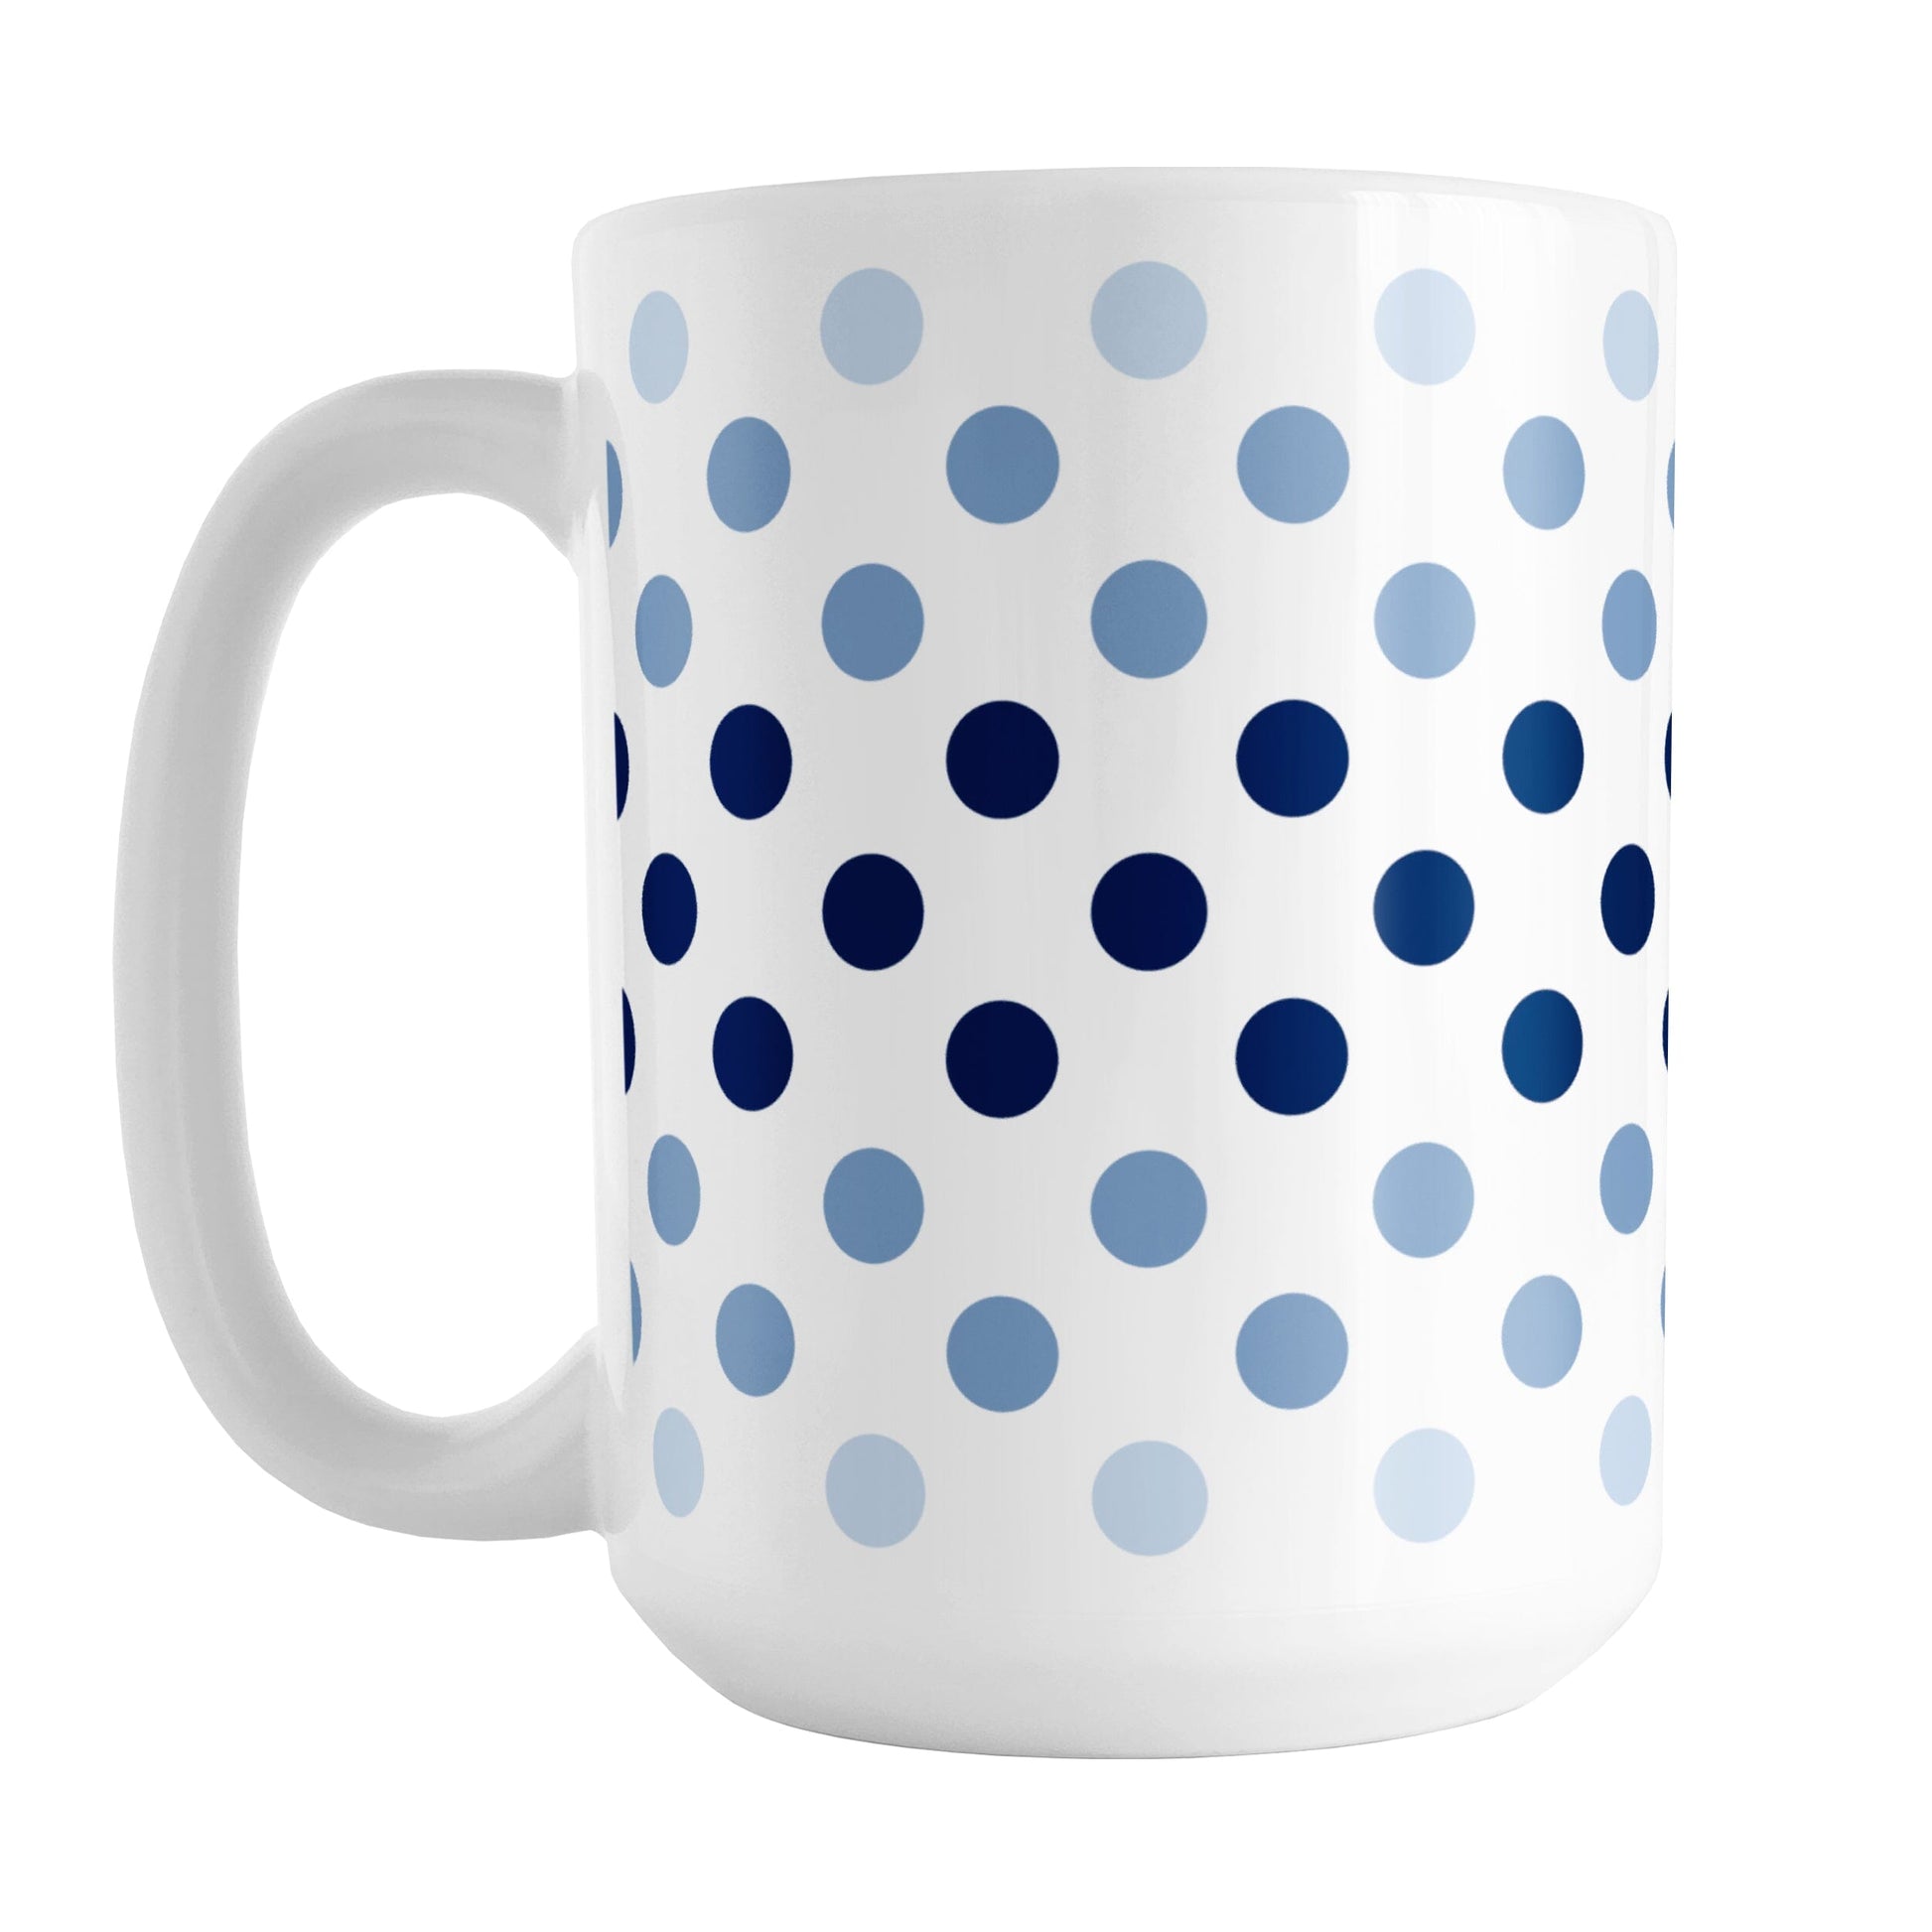 Polka Dots in Blue Mug (15oz) at Amy's Coffee Mugs. A ceramic coffee mug designed with polka dots in different shades of blue, with the darker blue color across the middle and the lighter blue along the top and bottom, in a pattern that wraps around the mug to the handle. 